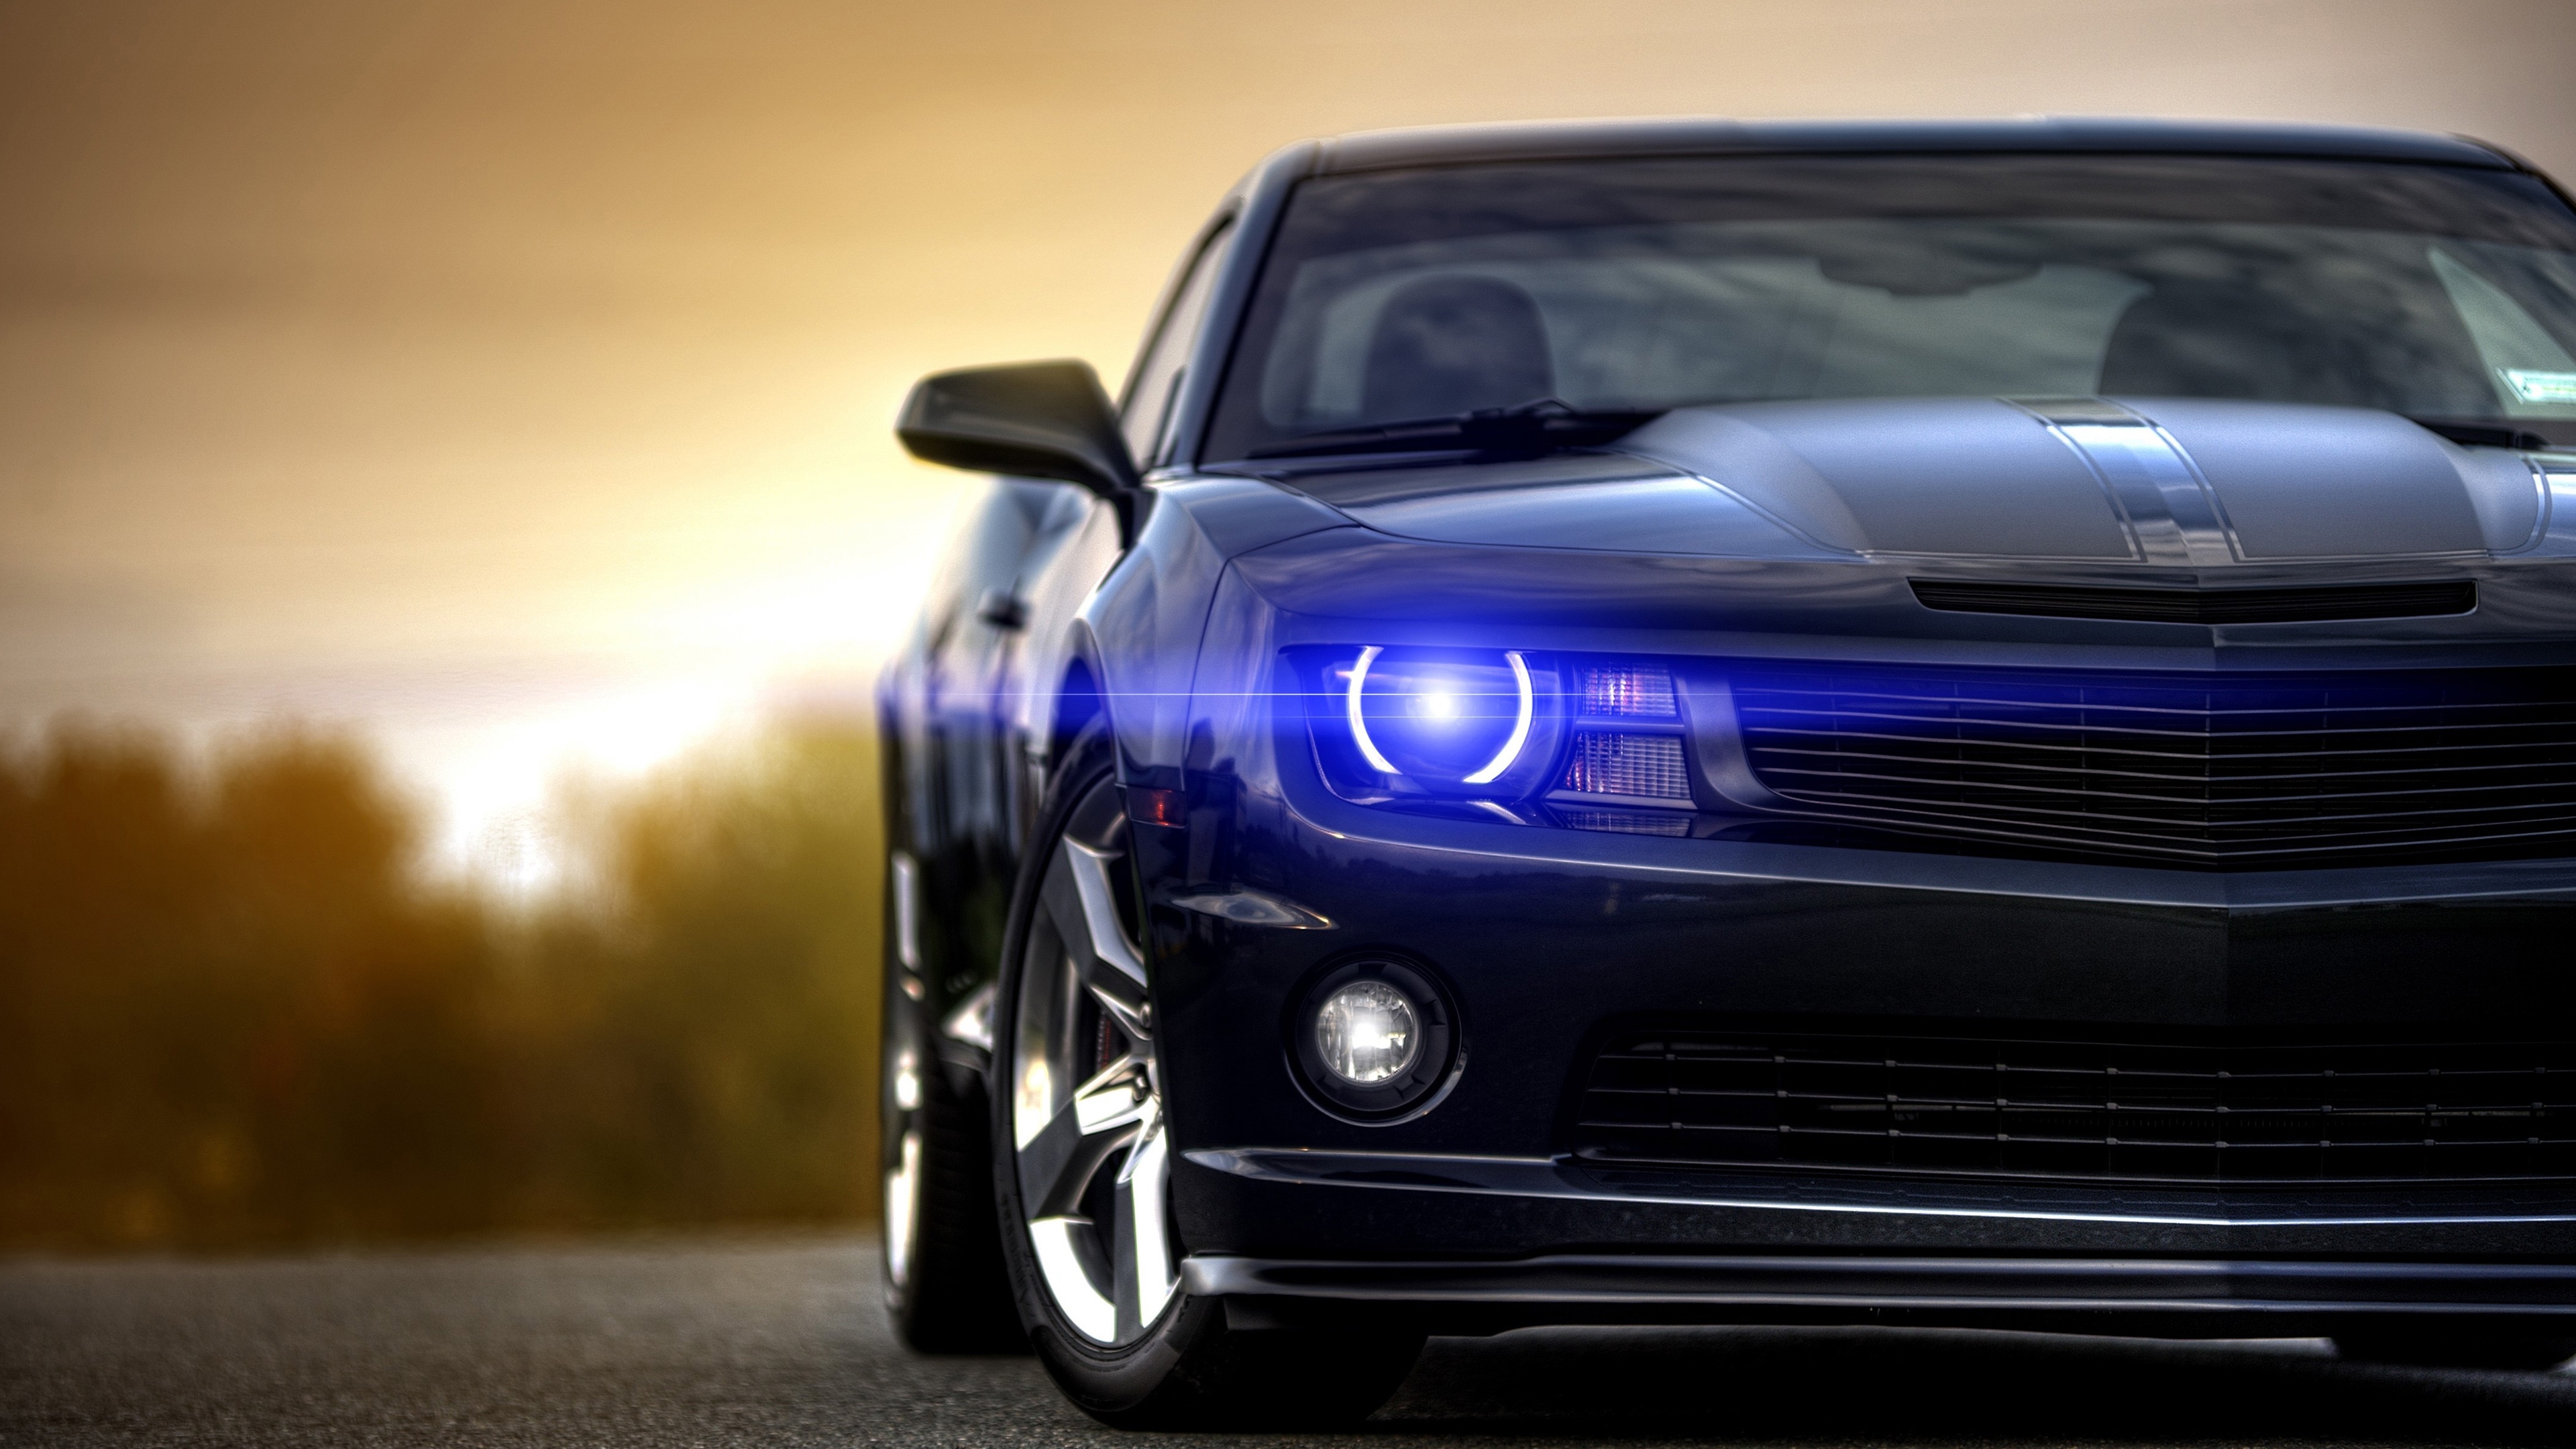 Muscle Car Wallpaper Muscle Cars Cars Wallpapers in jpg format for